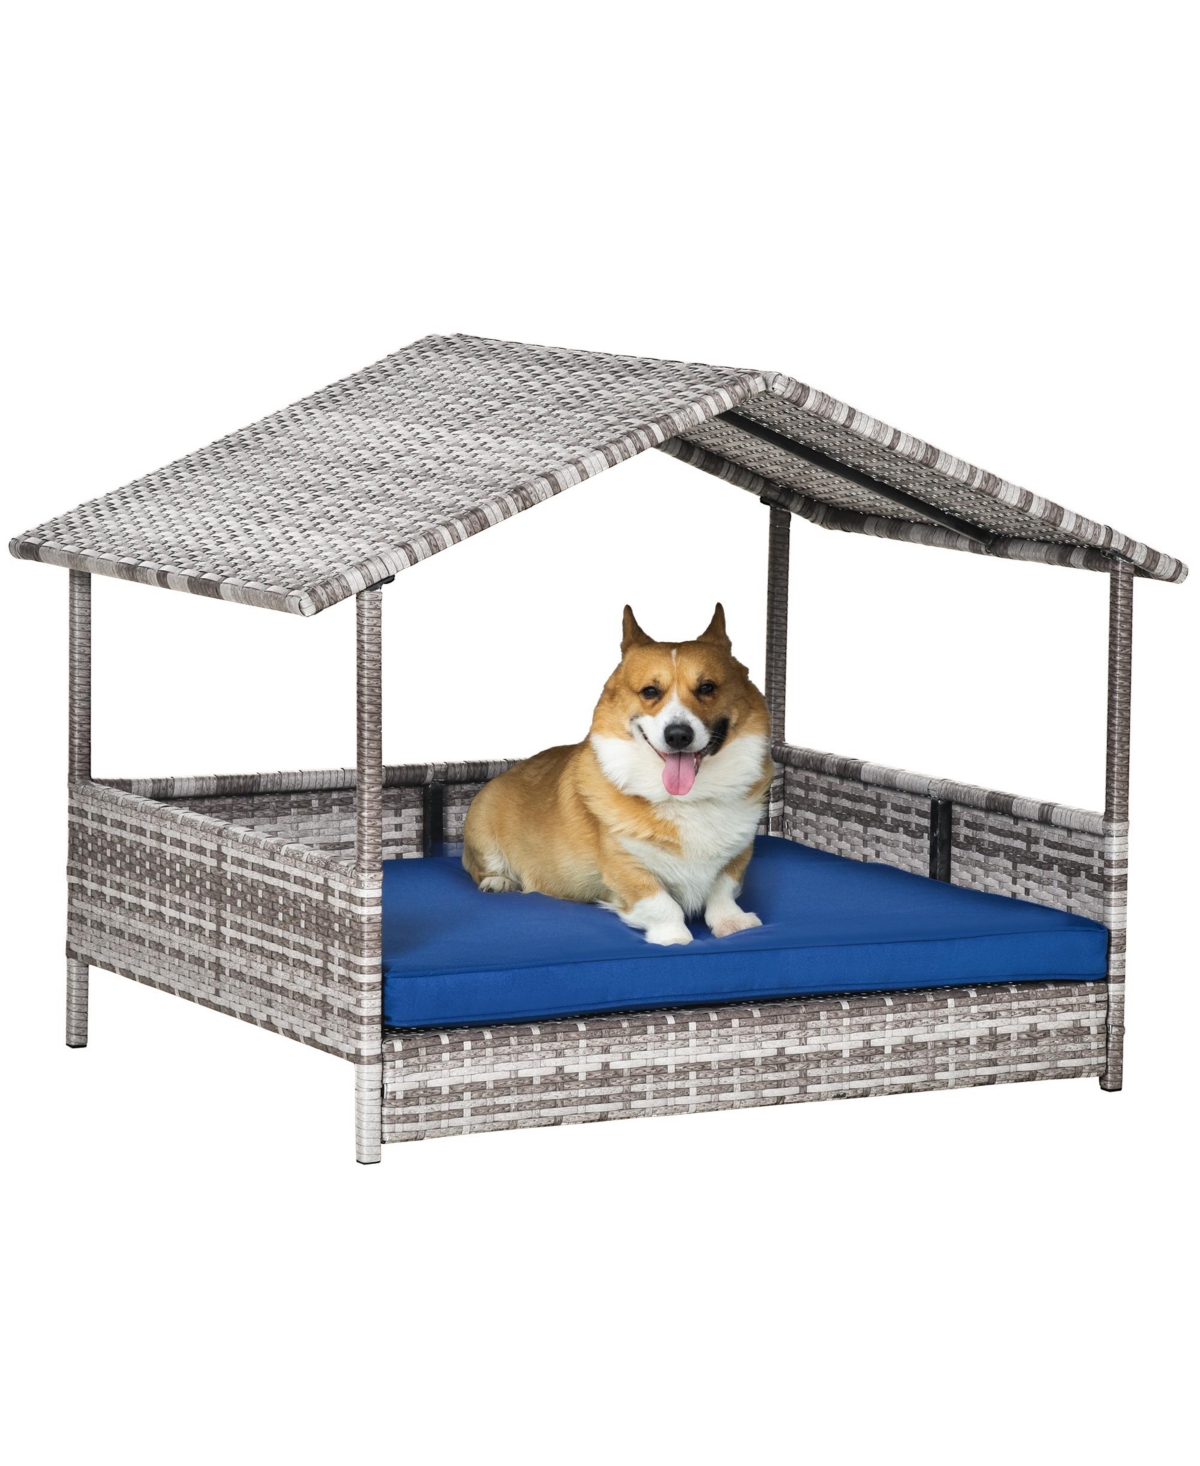 Elevated Wicker Dog House, Raised Rattan Pet Bed Cabana Canopy, Blue - Blue